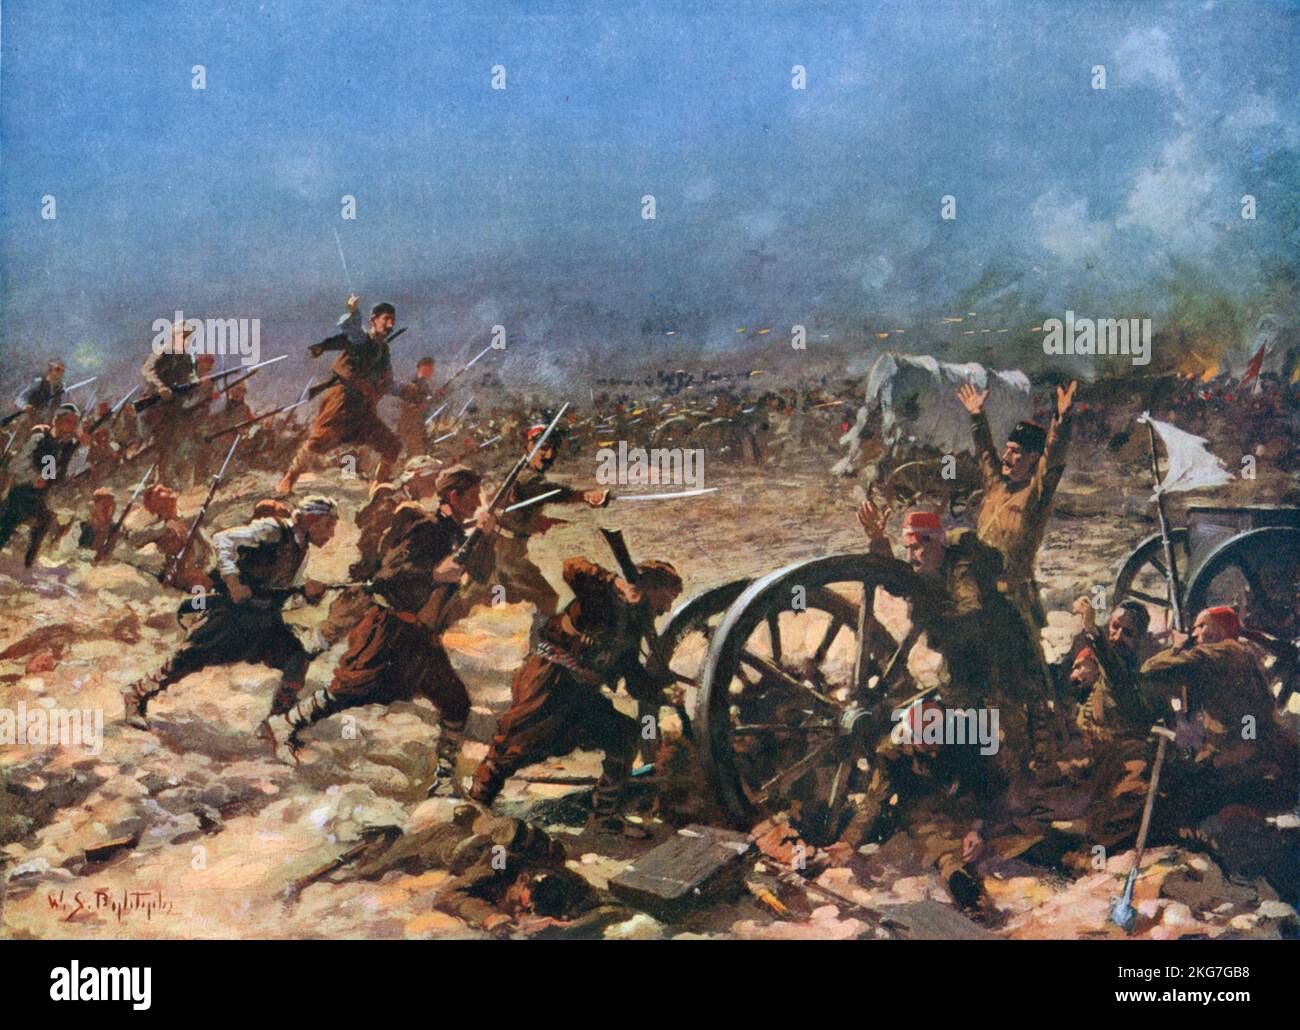 An illustration entitled Battle of Kirk Kilisse which was part of the First Balkan War between Bulgaria and the Ottoman Empire.   It took place on 24 October 1912, when the Bulgarian army commanded by General Radko Dimitriev and General Ivan Fichev defeated an Ottoman army commanded by Mahmud Muhtar Pasha Kölemen Abdullah Pasha in Eastern Thrace. Stock Photo